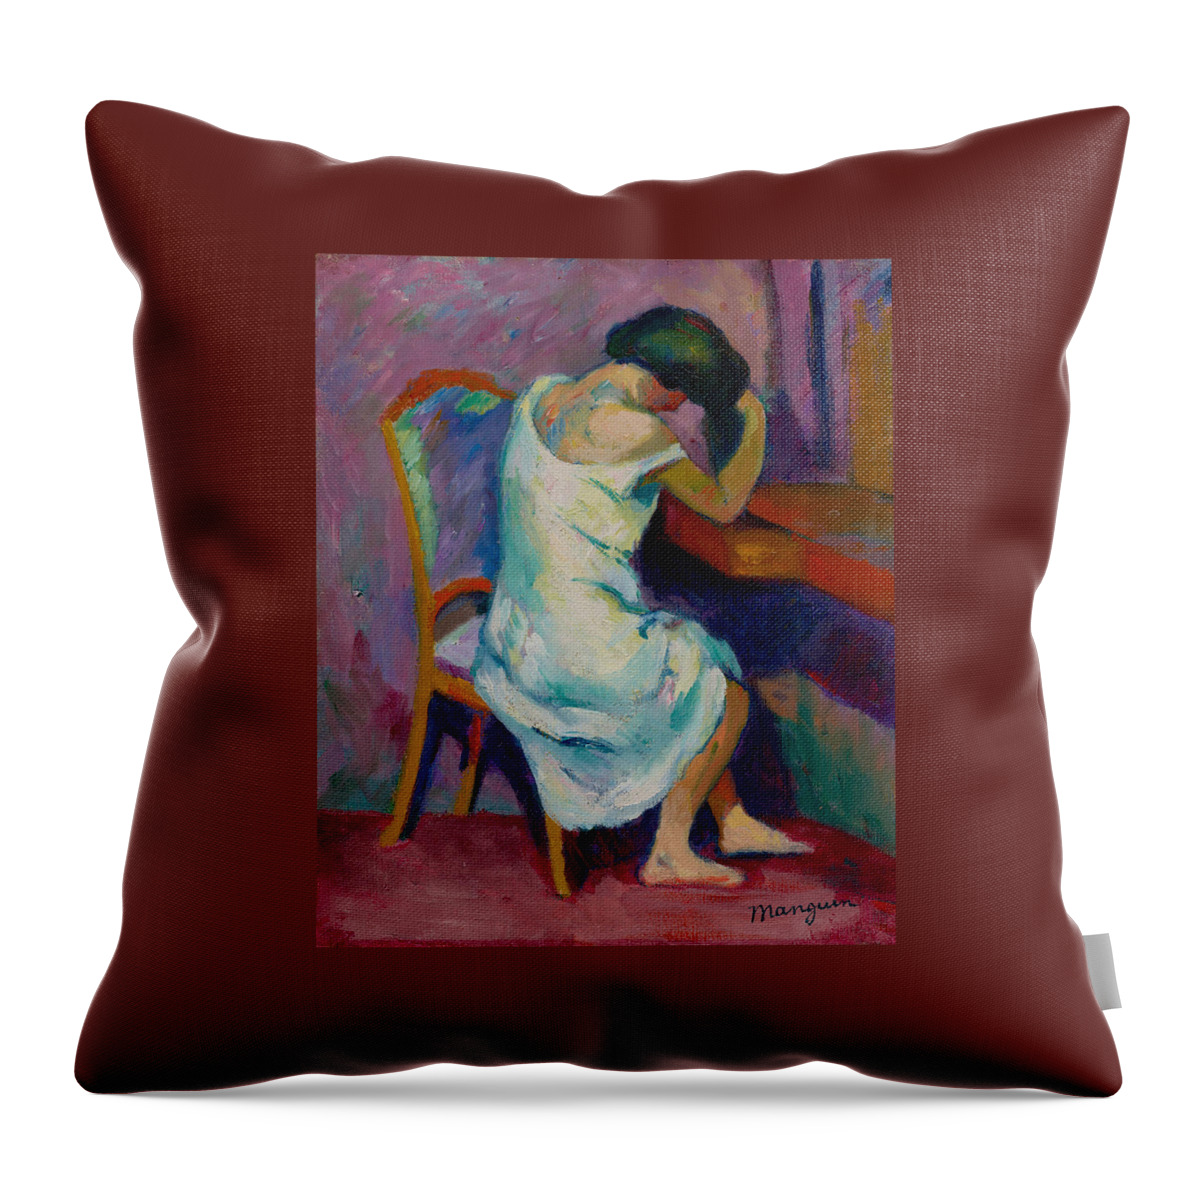 Henri Manguin Throw Pillow featuring the painting Jeanne Doing Her Hair by Henri Manguin